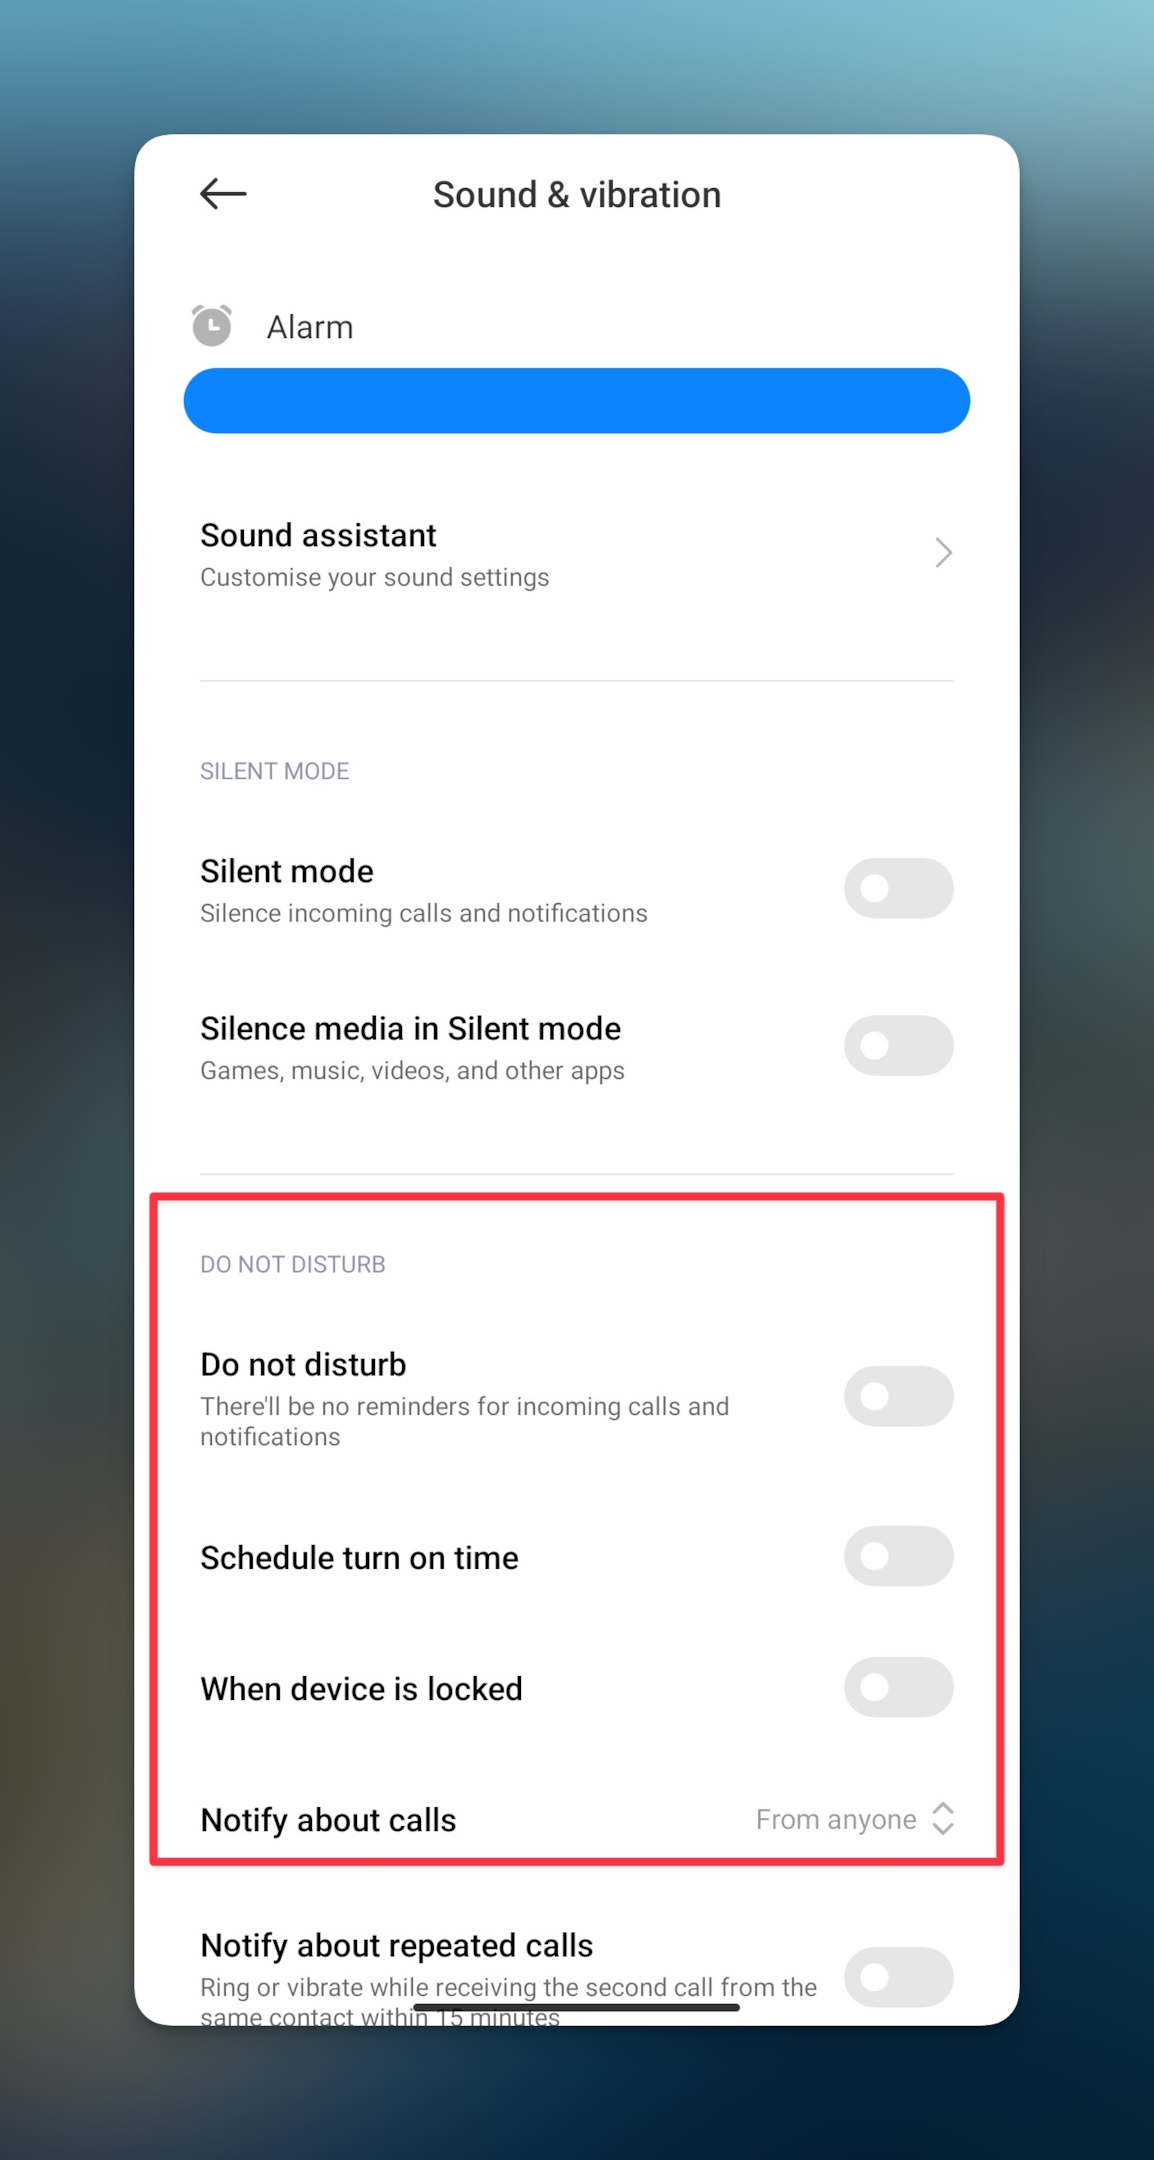 Remote.tools shows how to configure DND settings for Android phones